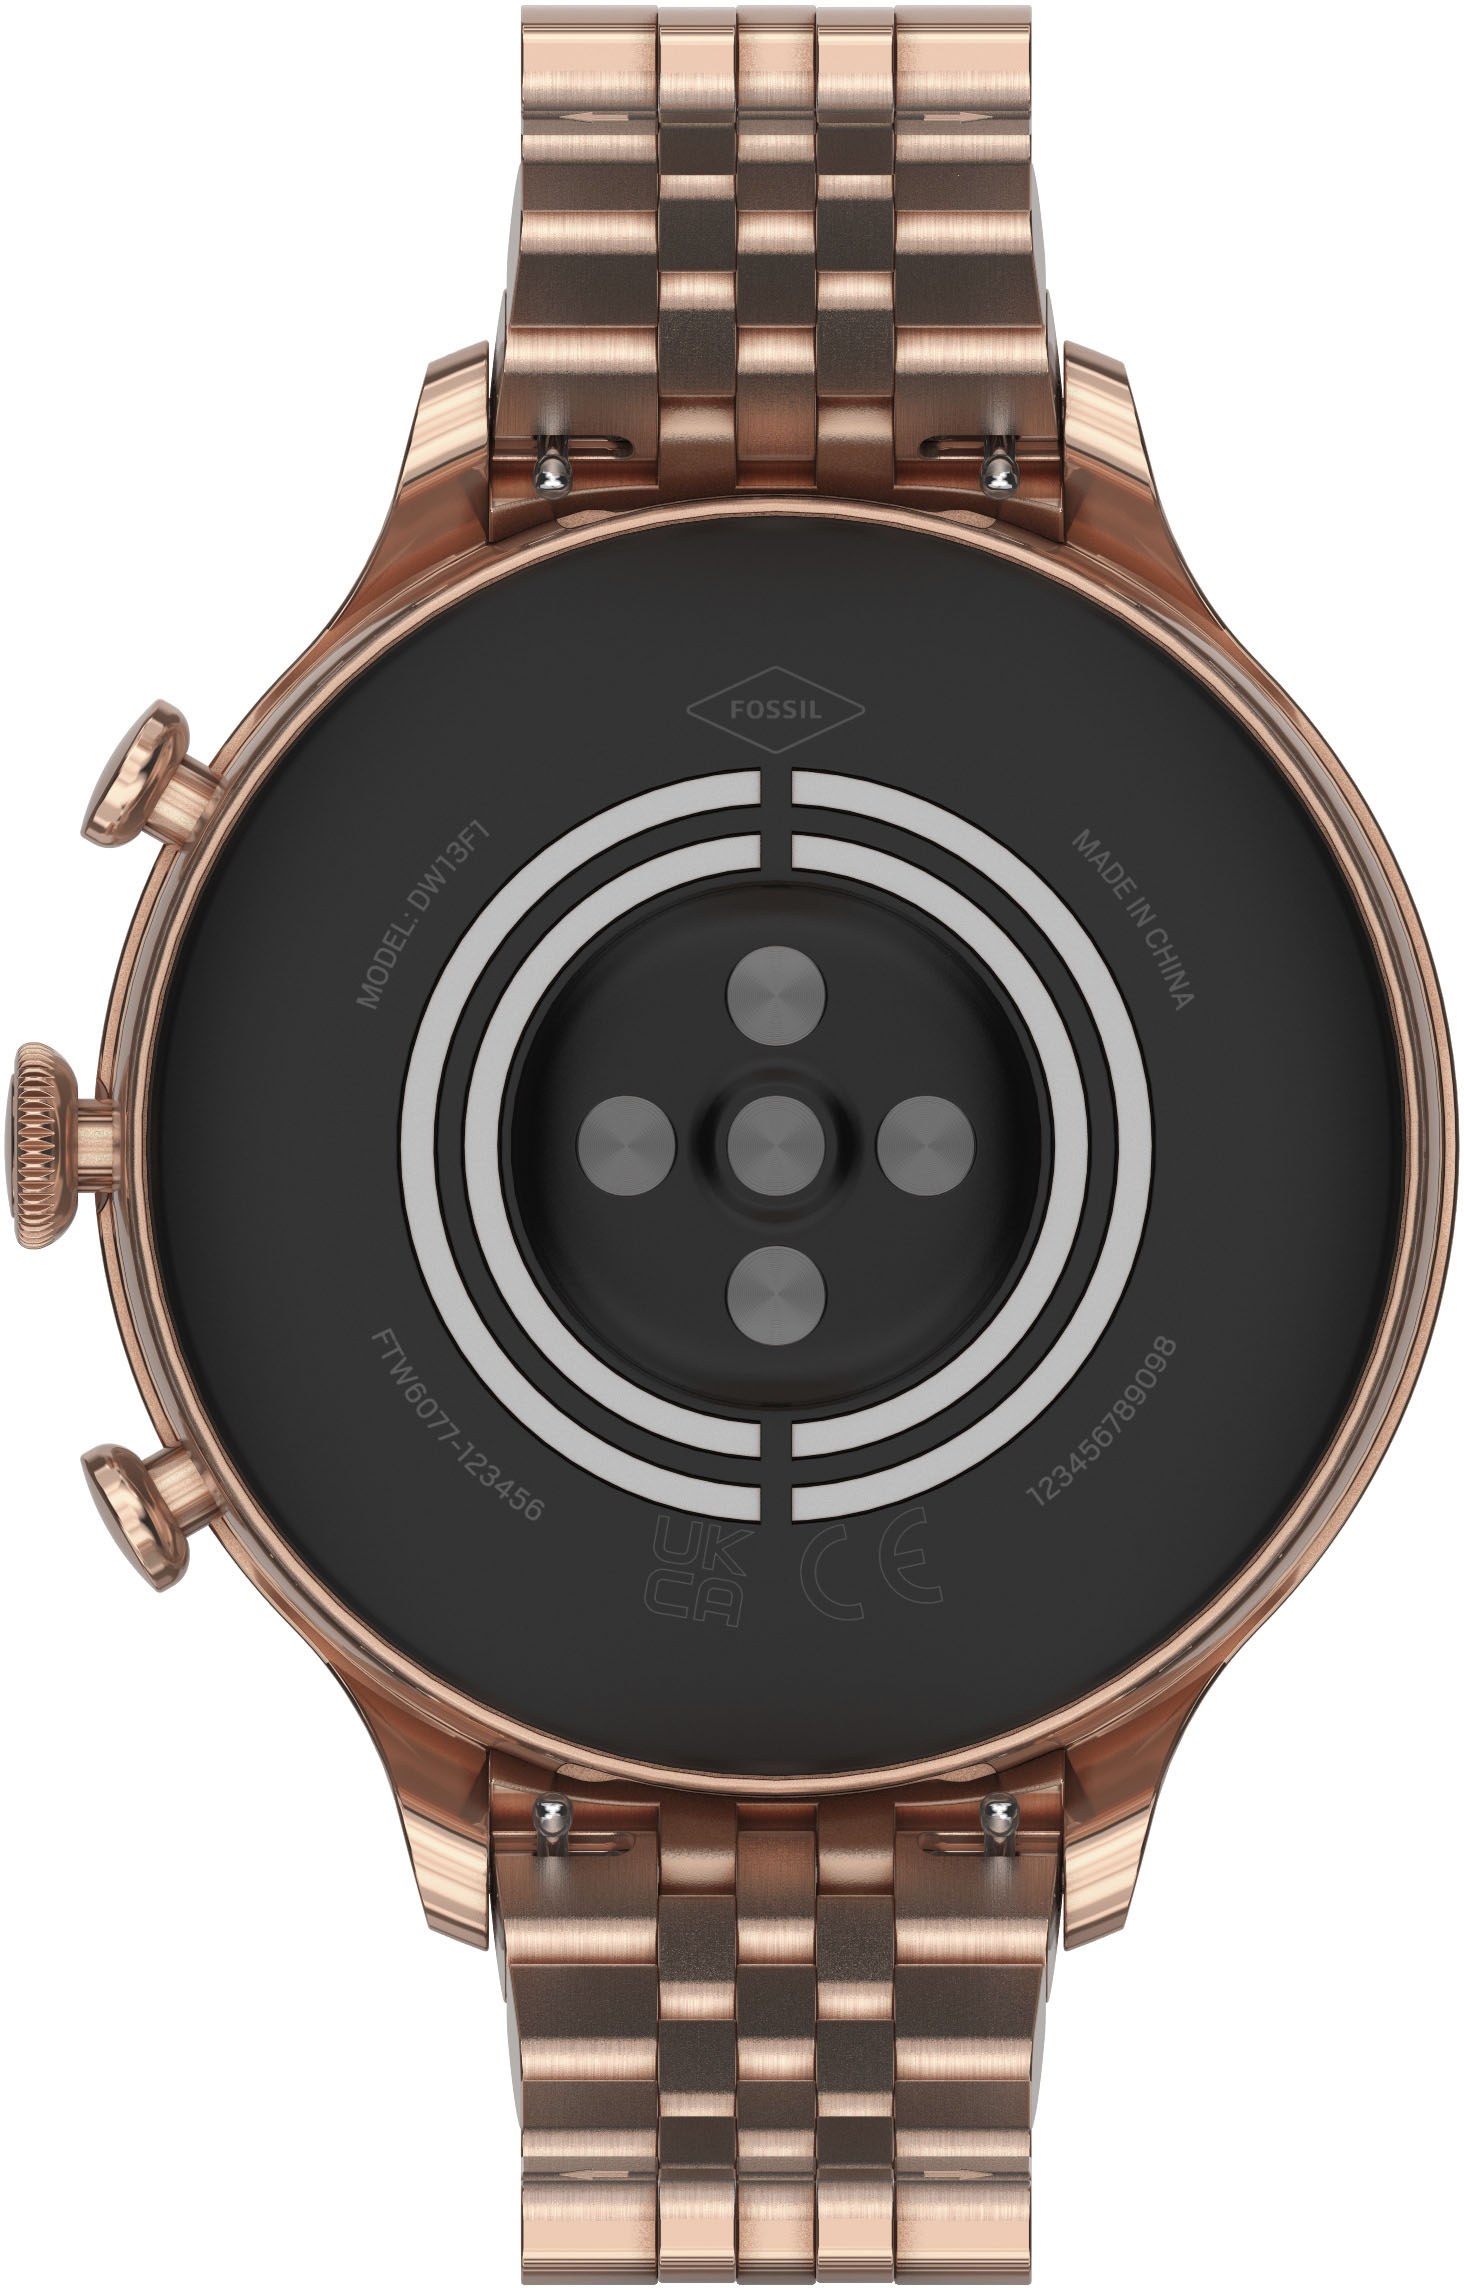 Questions and Answers: Fossil Gen 6 Smartwatch 42mm Stainless Steel ...